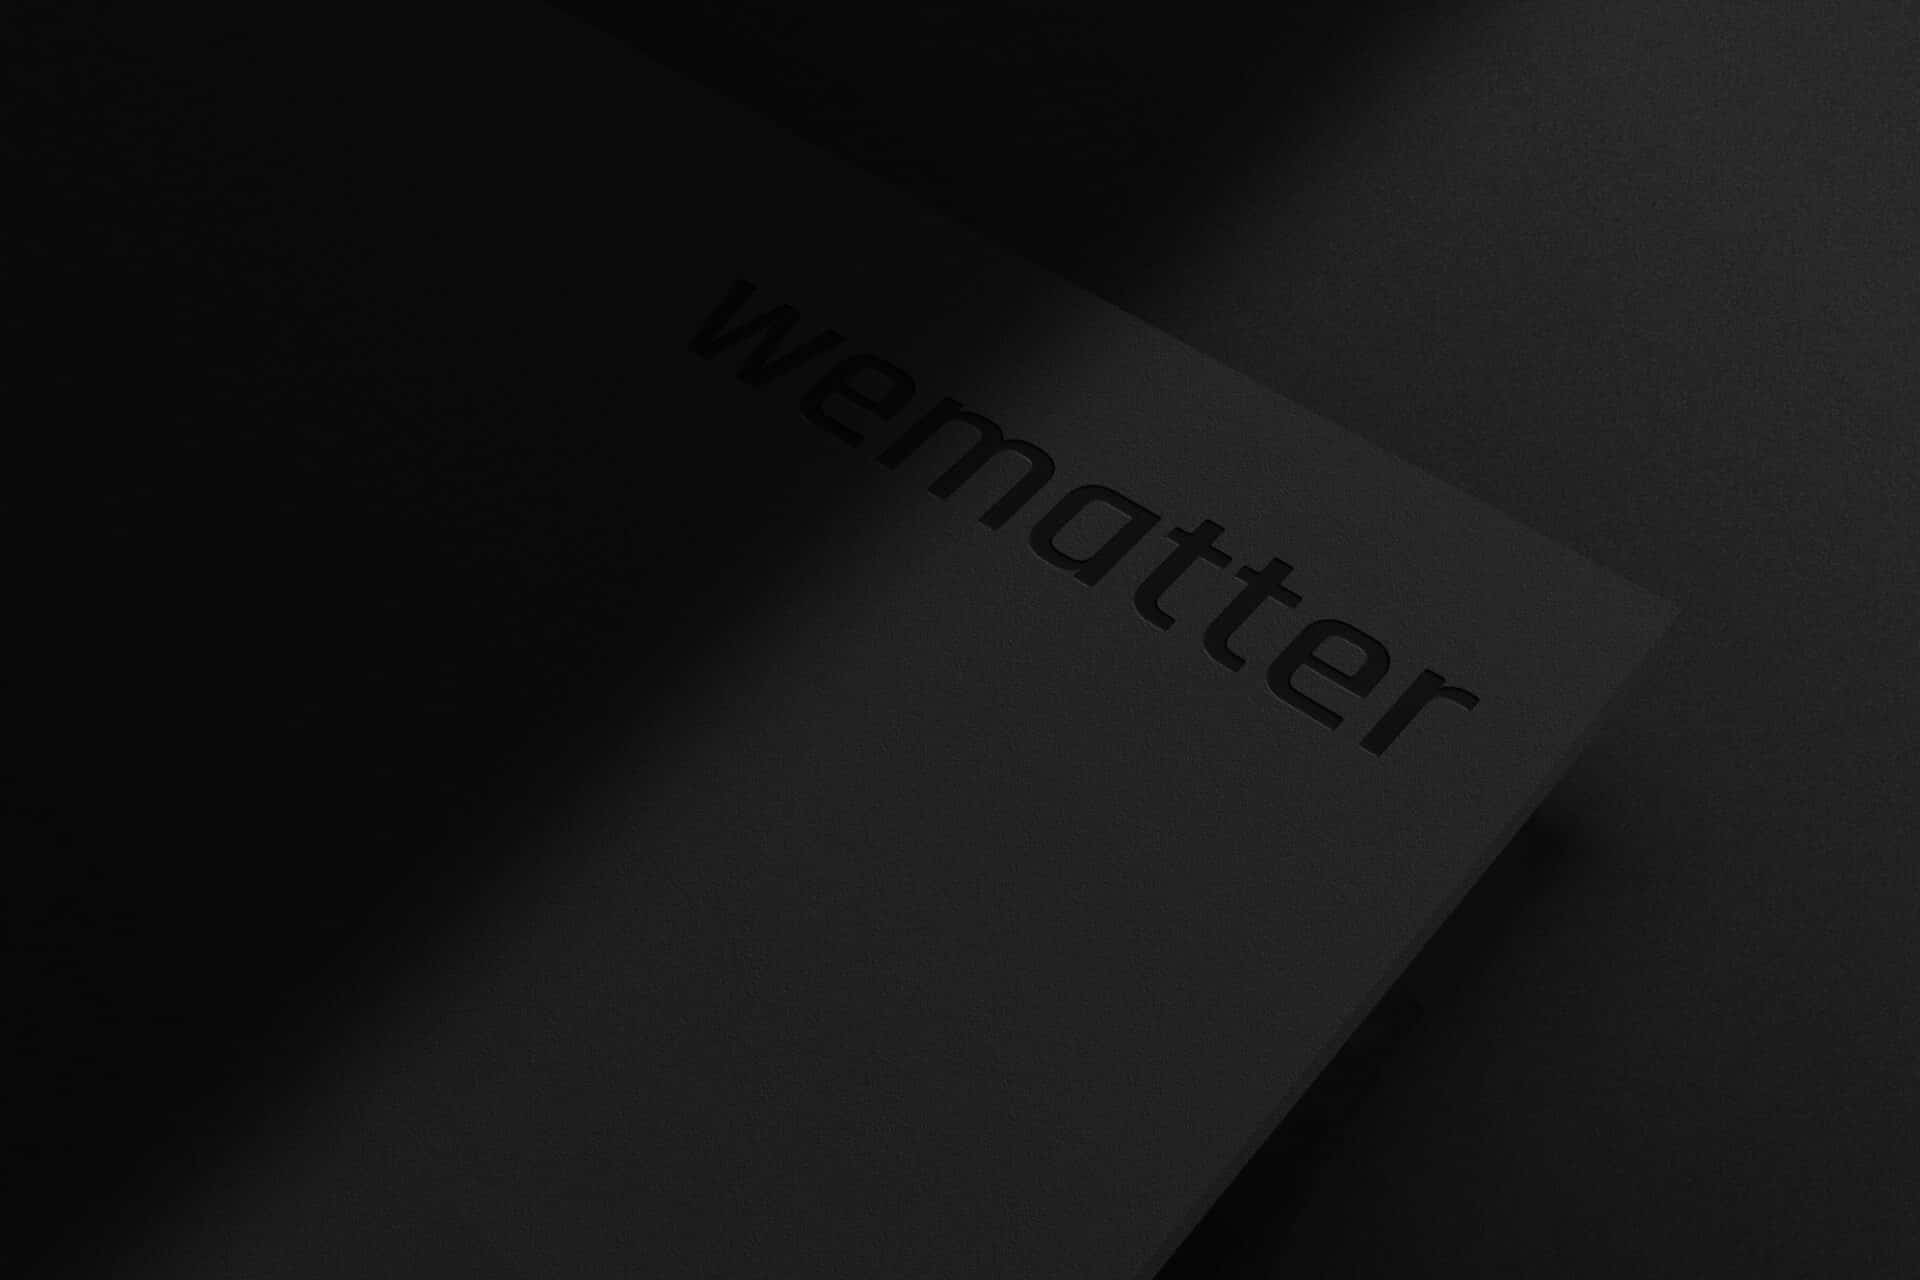  <strong>wematter</strong> Informationsmaterial